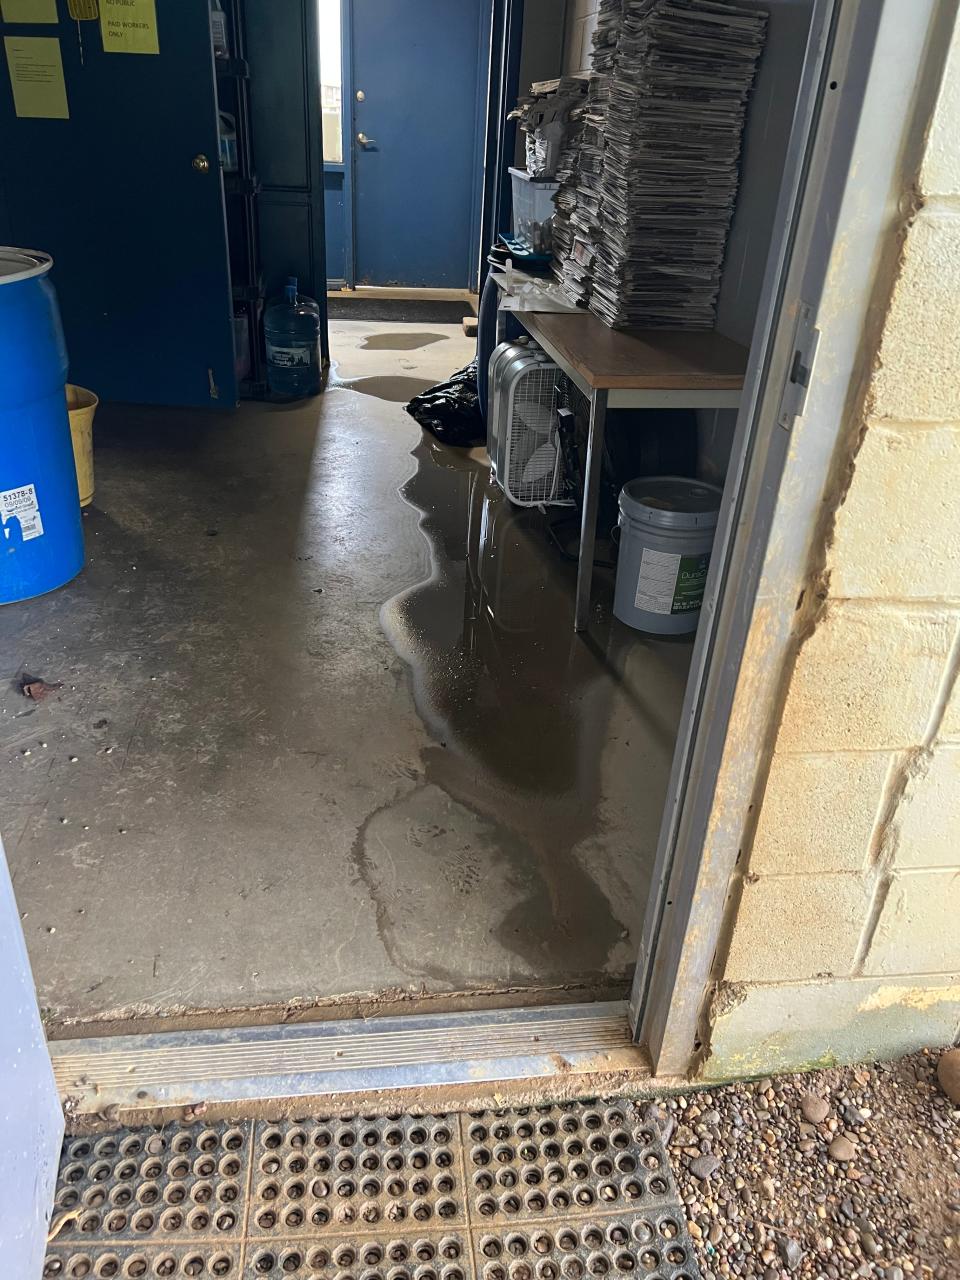 Due to a leaky roof and faulty drainage water puddles on the floor of the Guernsey County Dog Shelter.